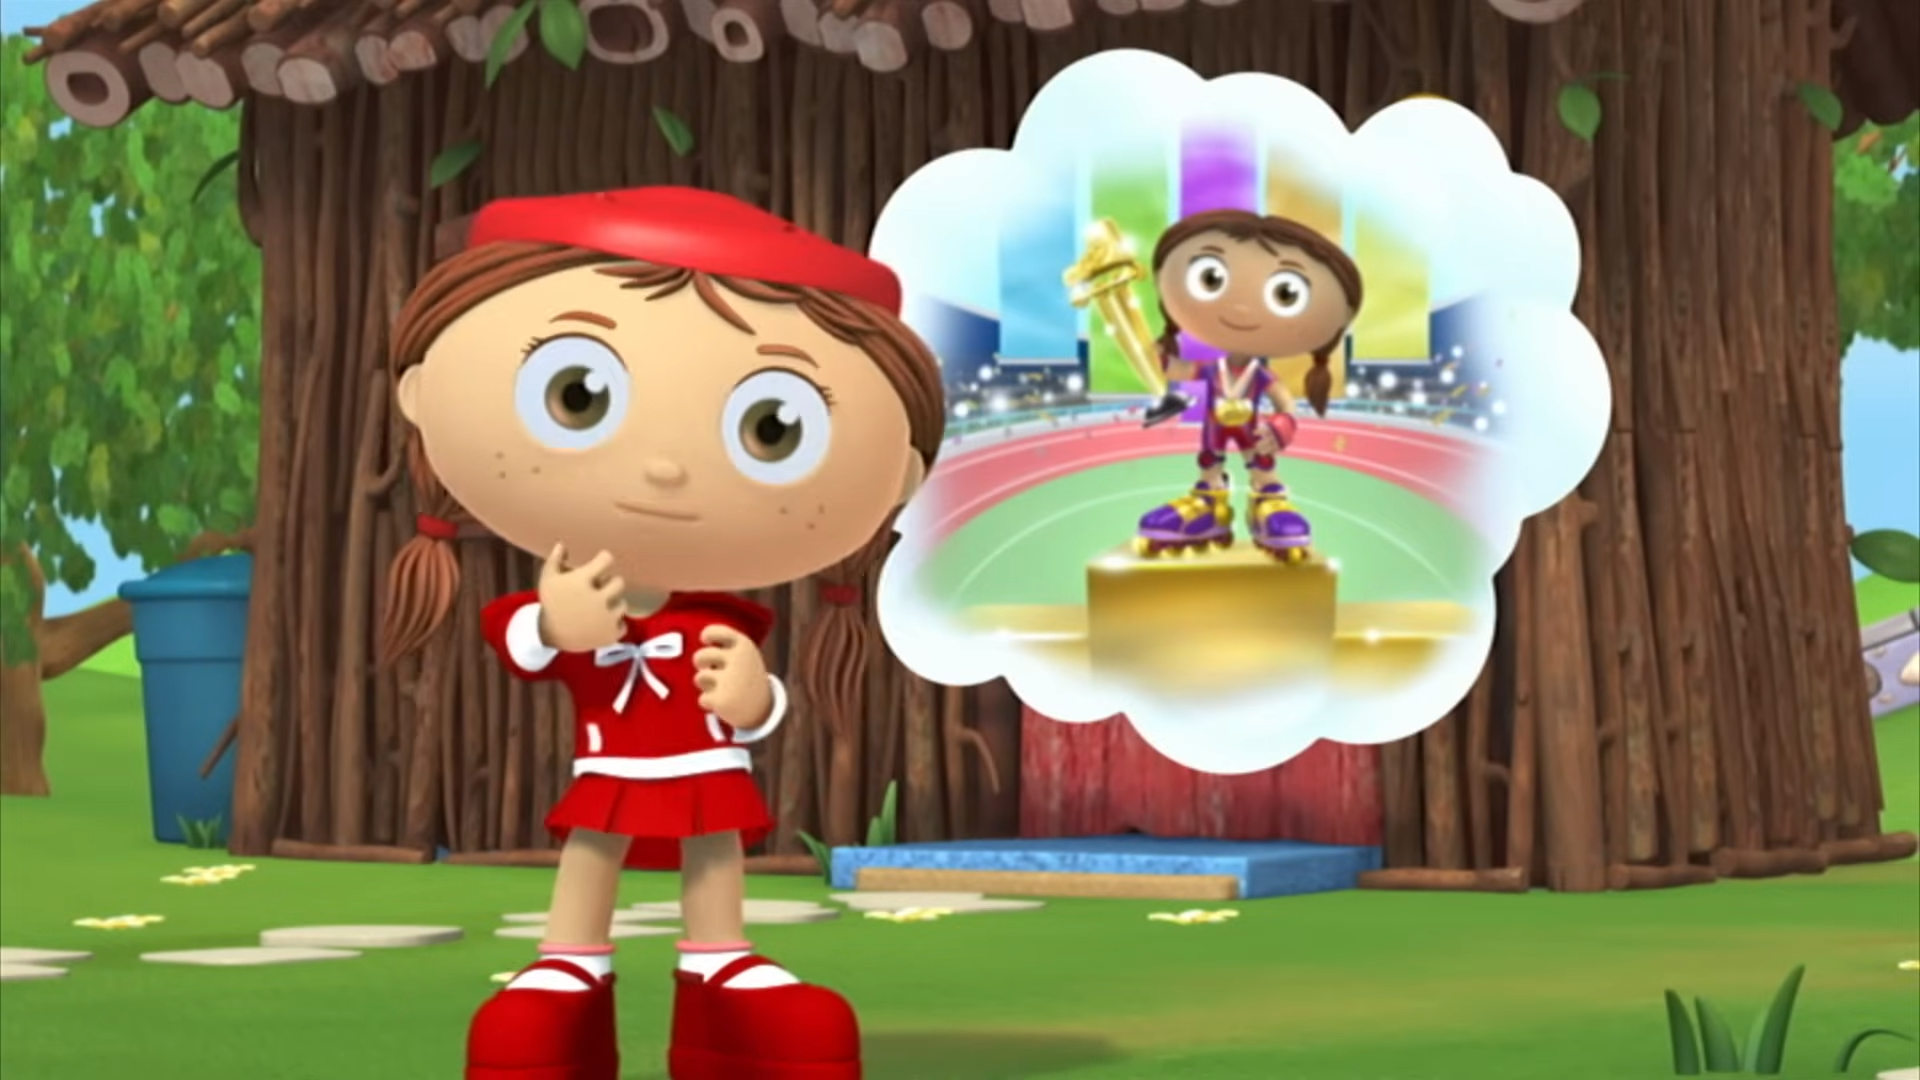 Image Red Olderpng Super Why Wiki Fandom Powered By Wikia